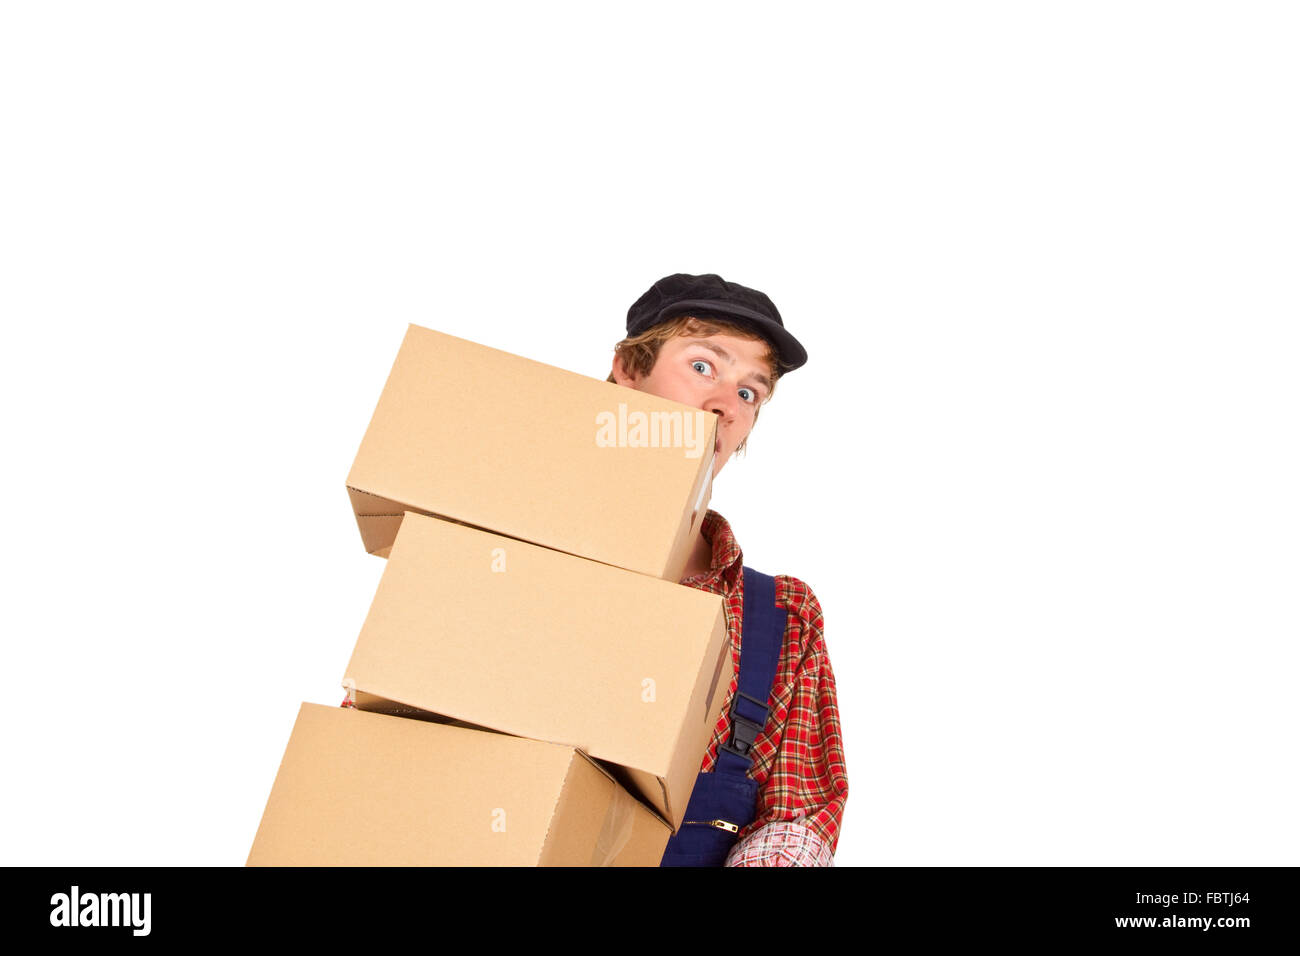 Parcel delivery Stock Photo